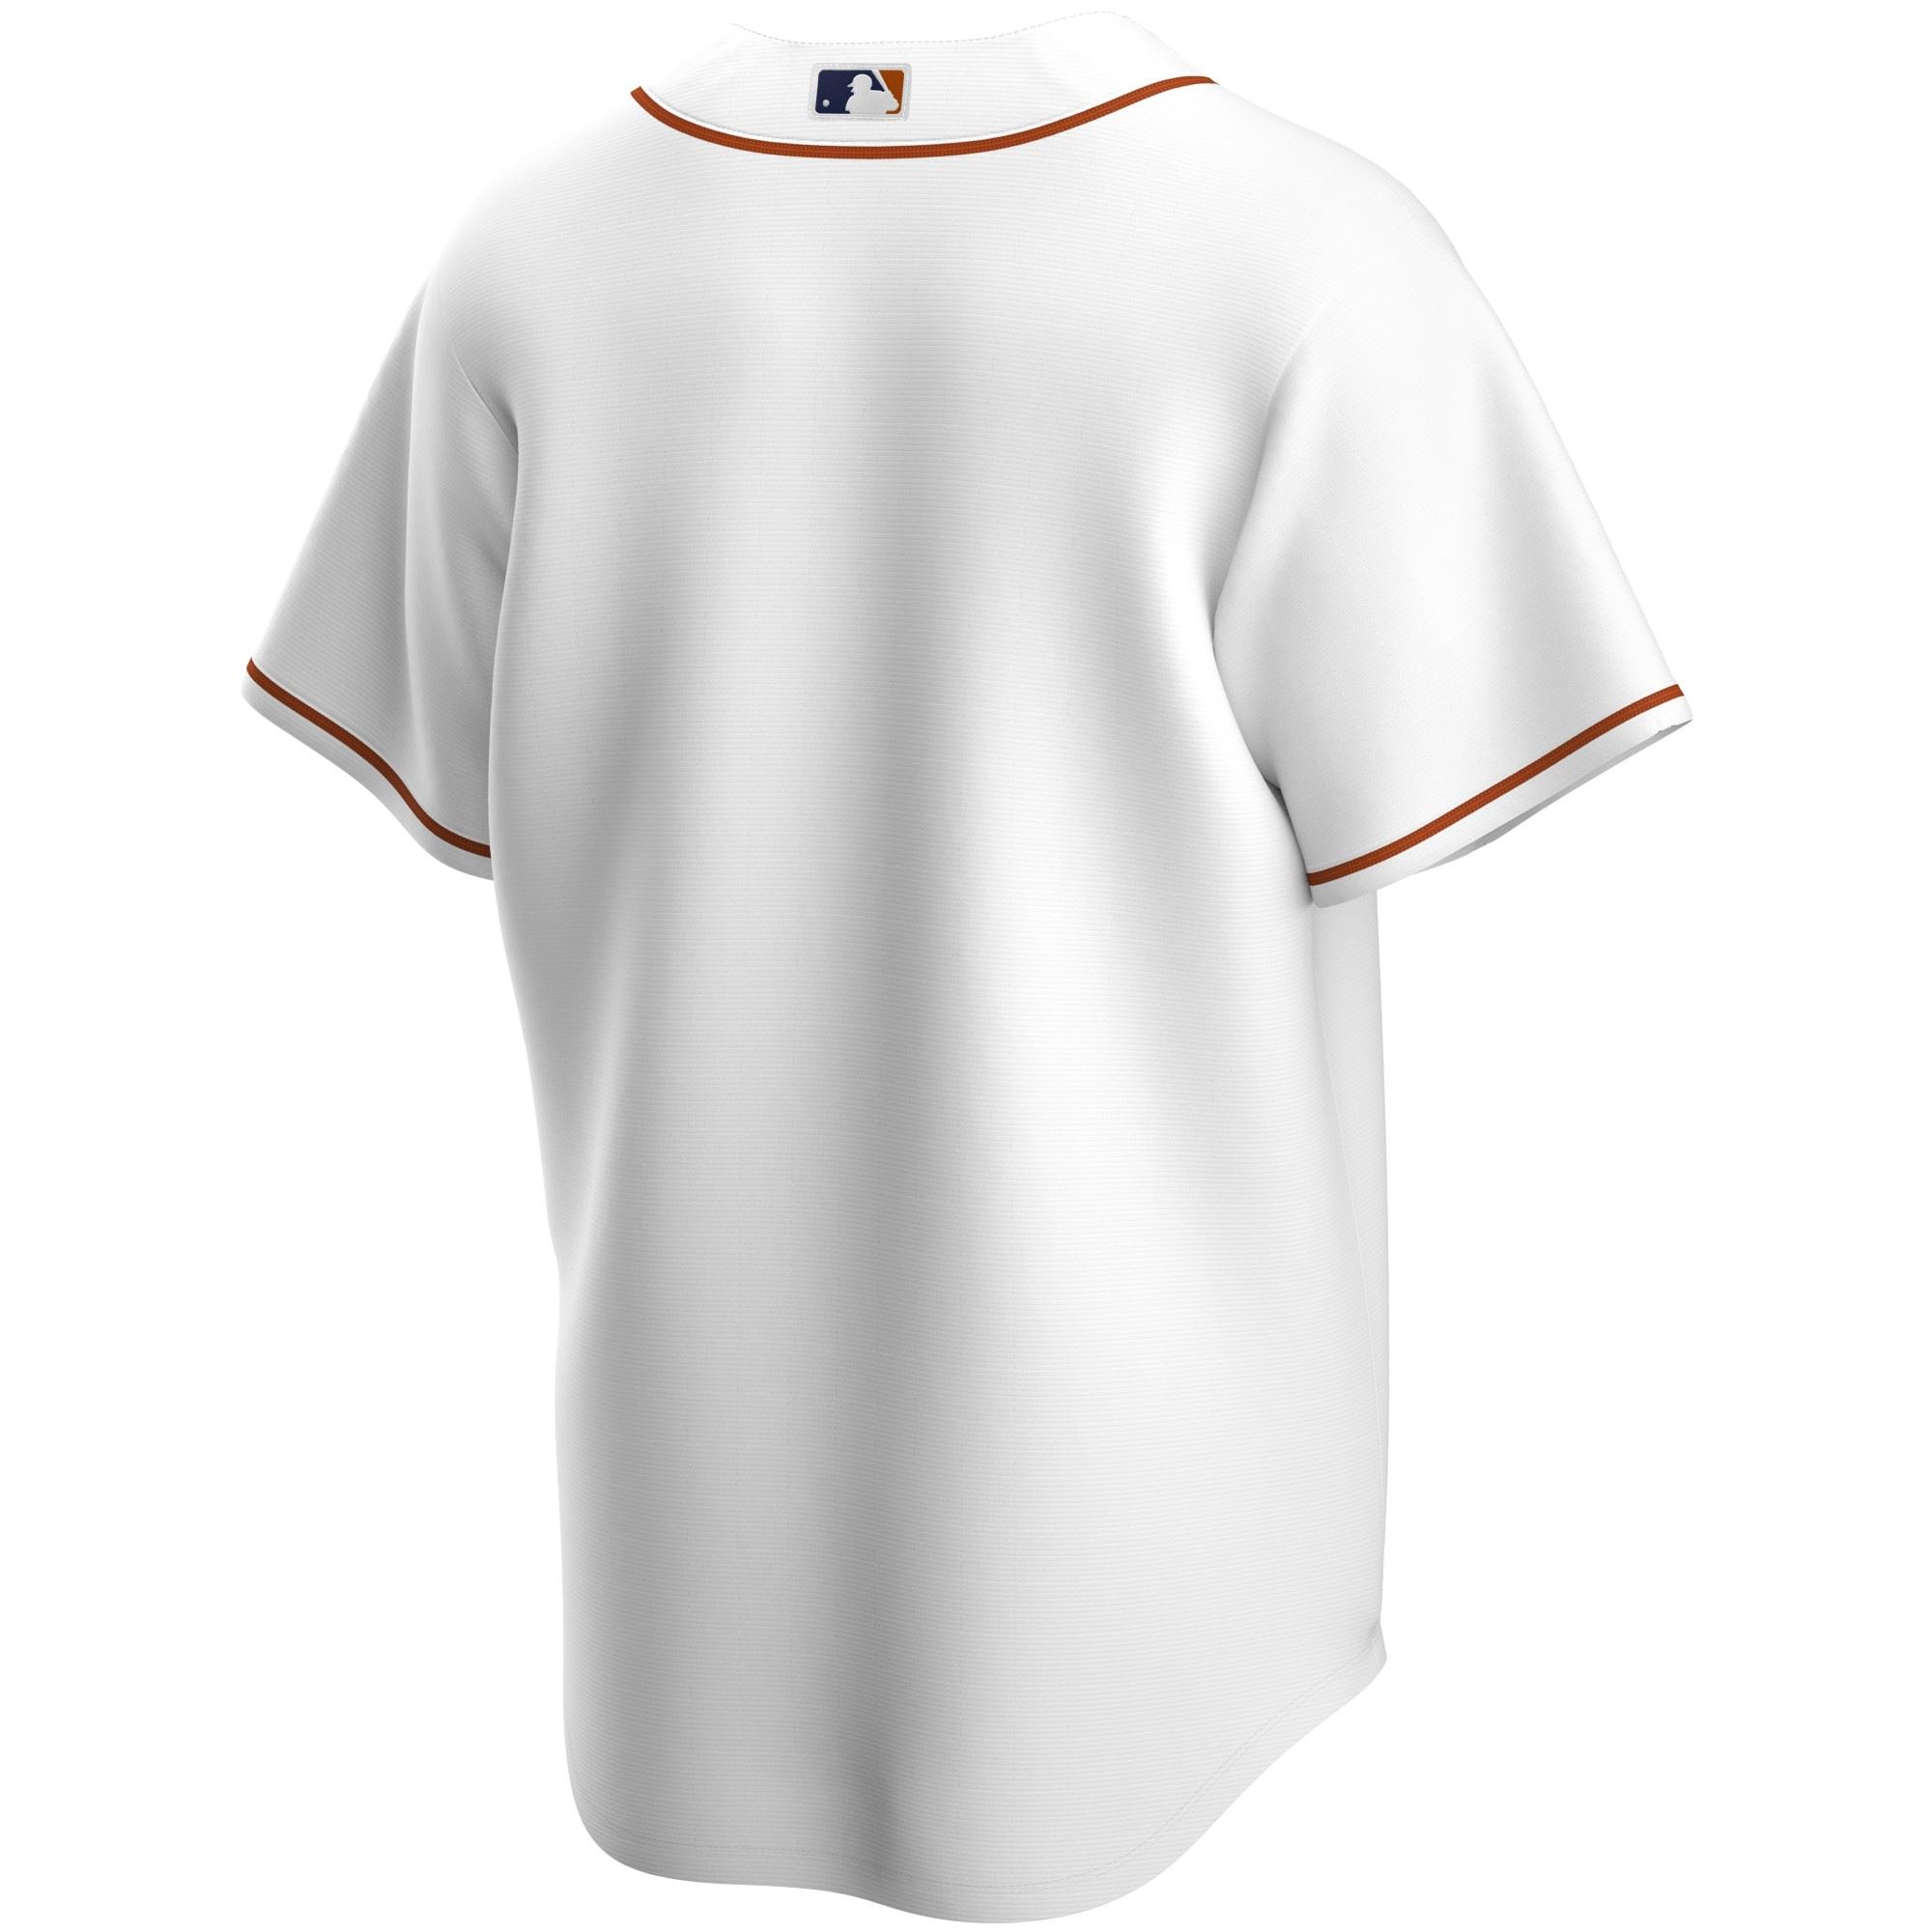 Houston Astros Official MLB Replica Home Jersey White Nike